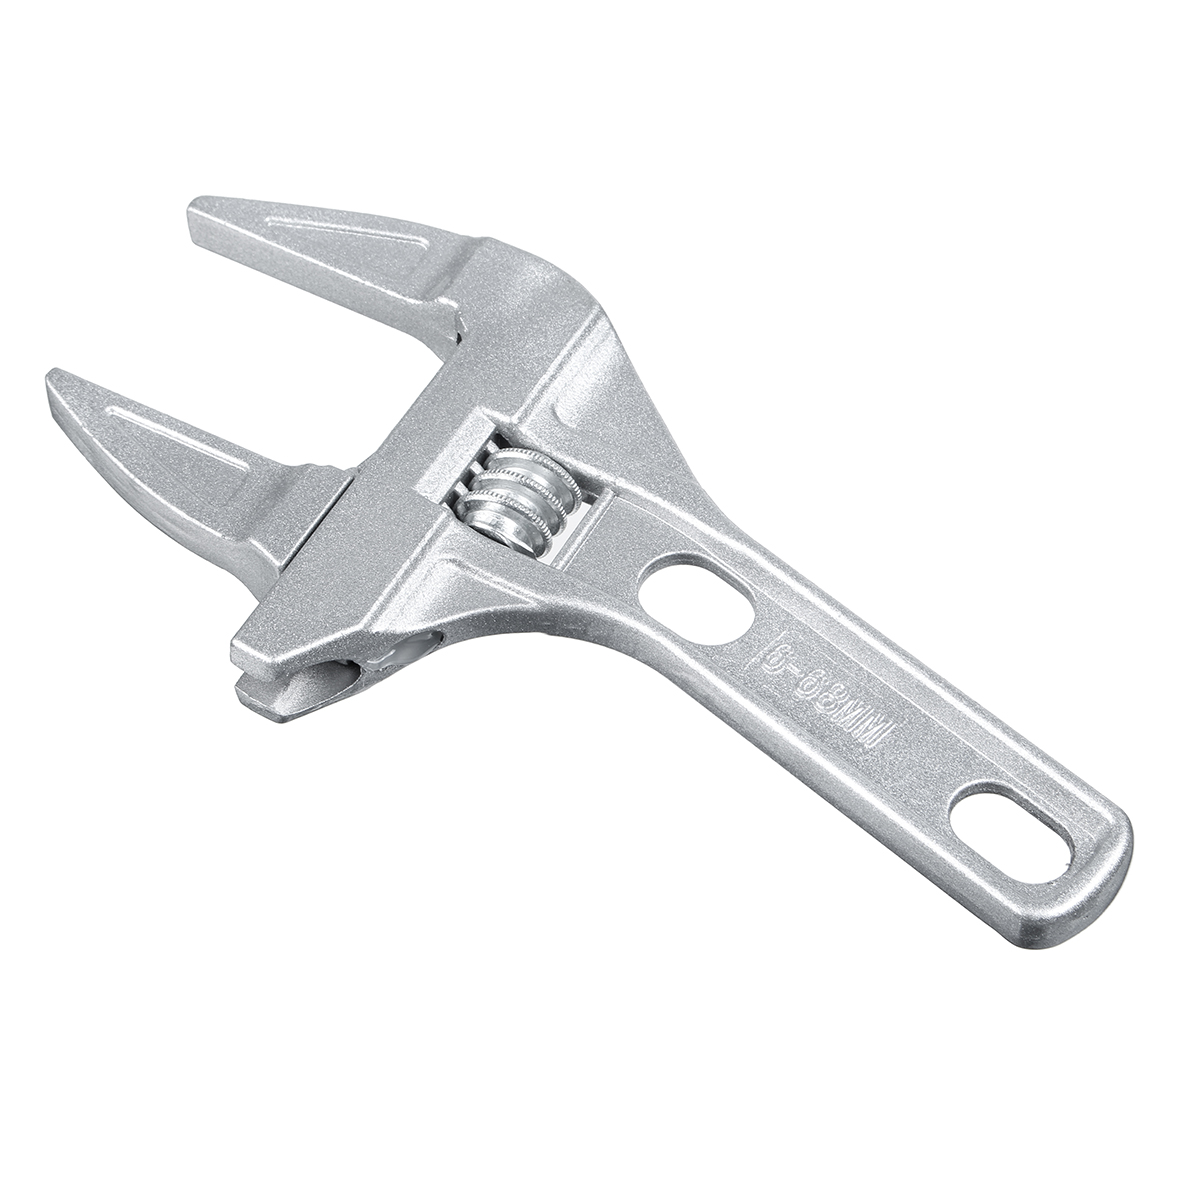 Adjustable-Spanner-16-68mm-Big-Opening-Spanner-Wrench-Mini-Nut-Key-Hand-Tools-Metal-Universal-Spanne-1625089-1